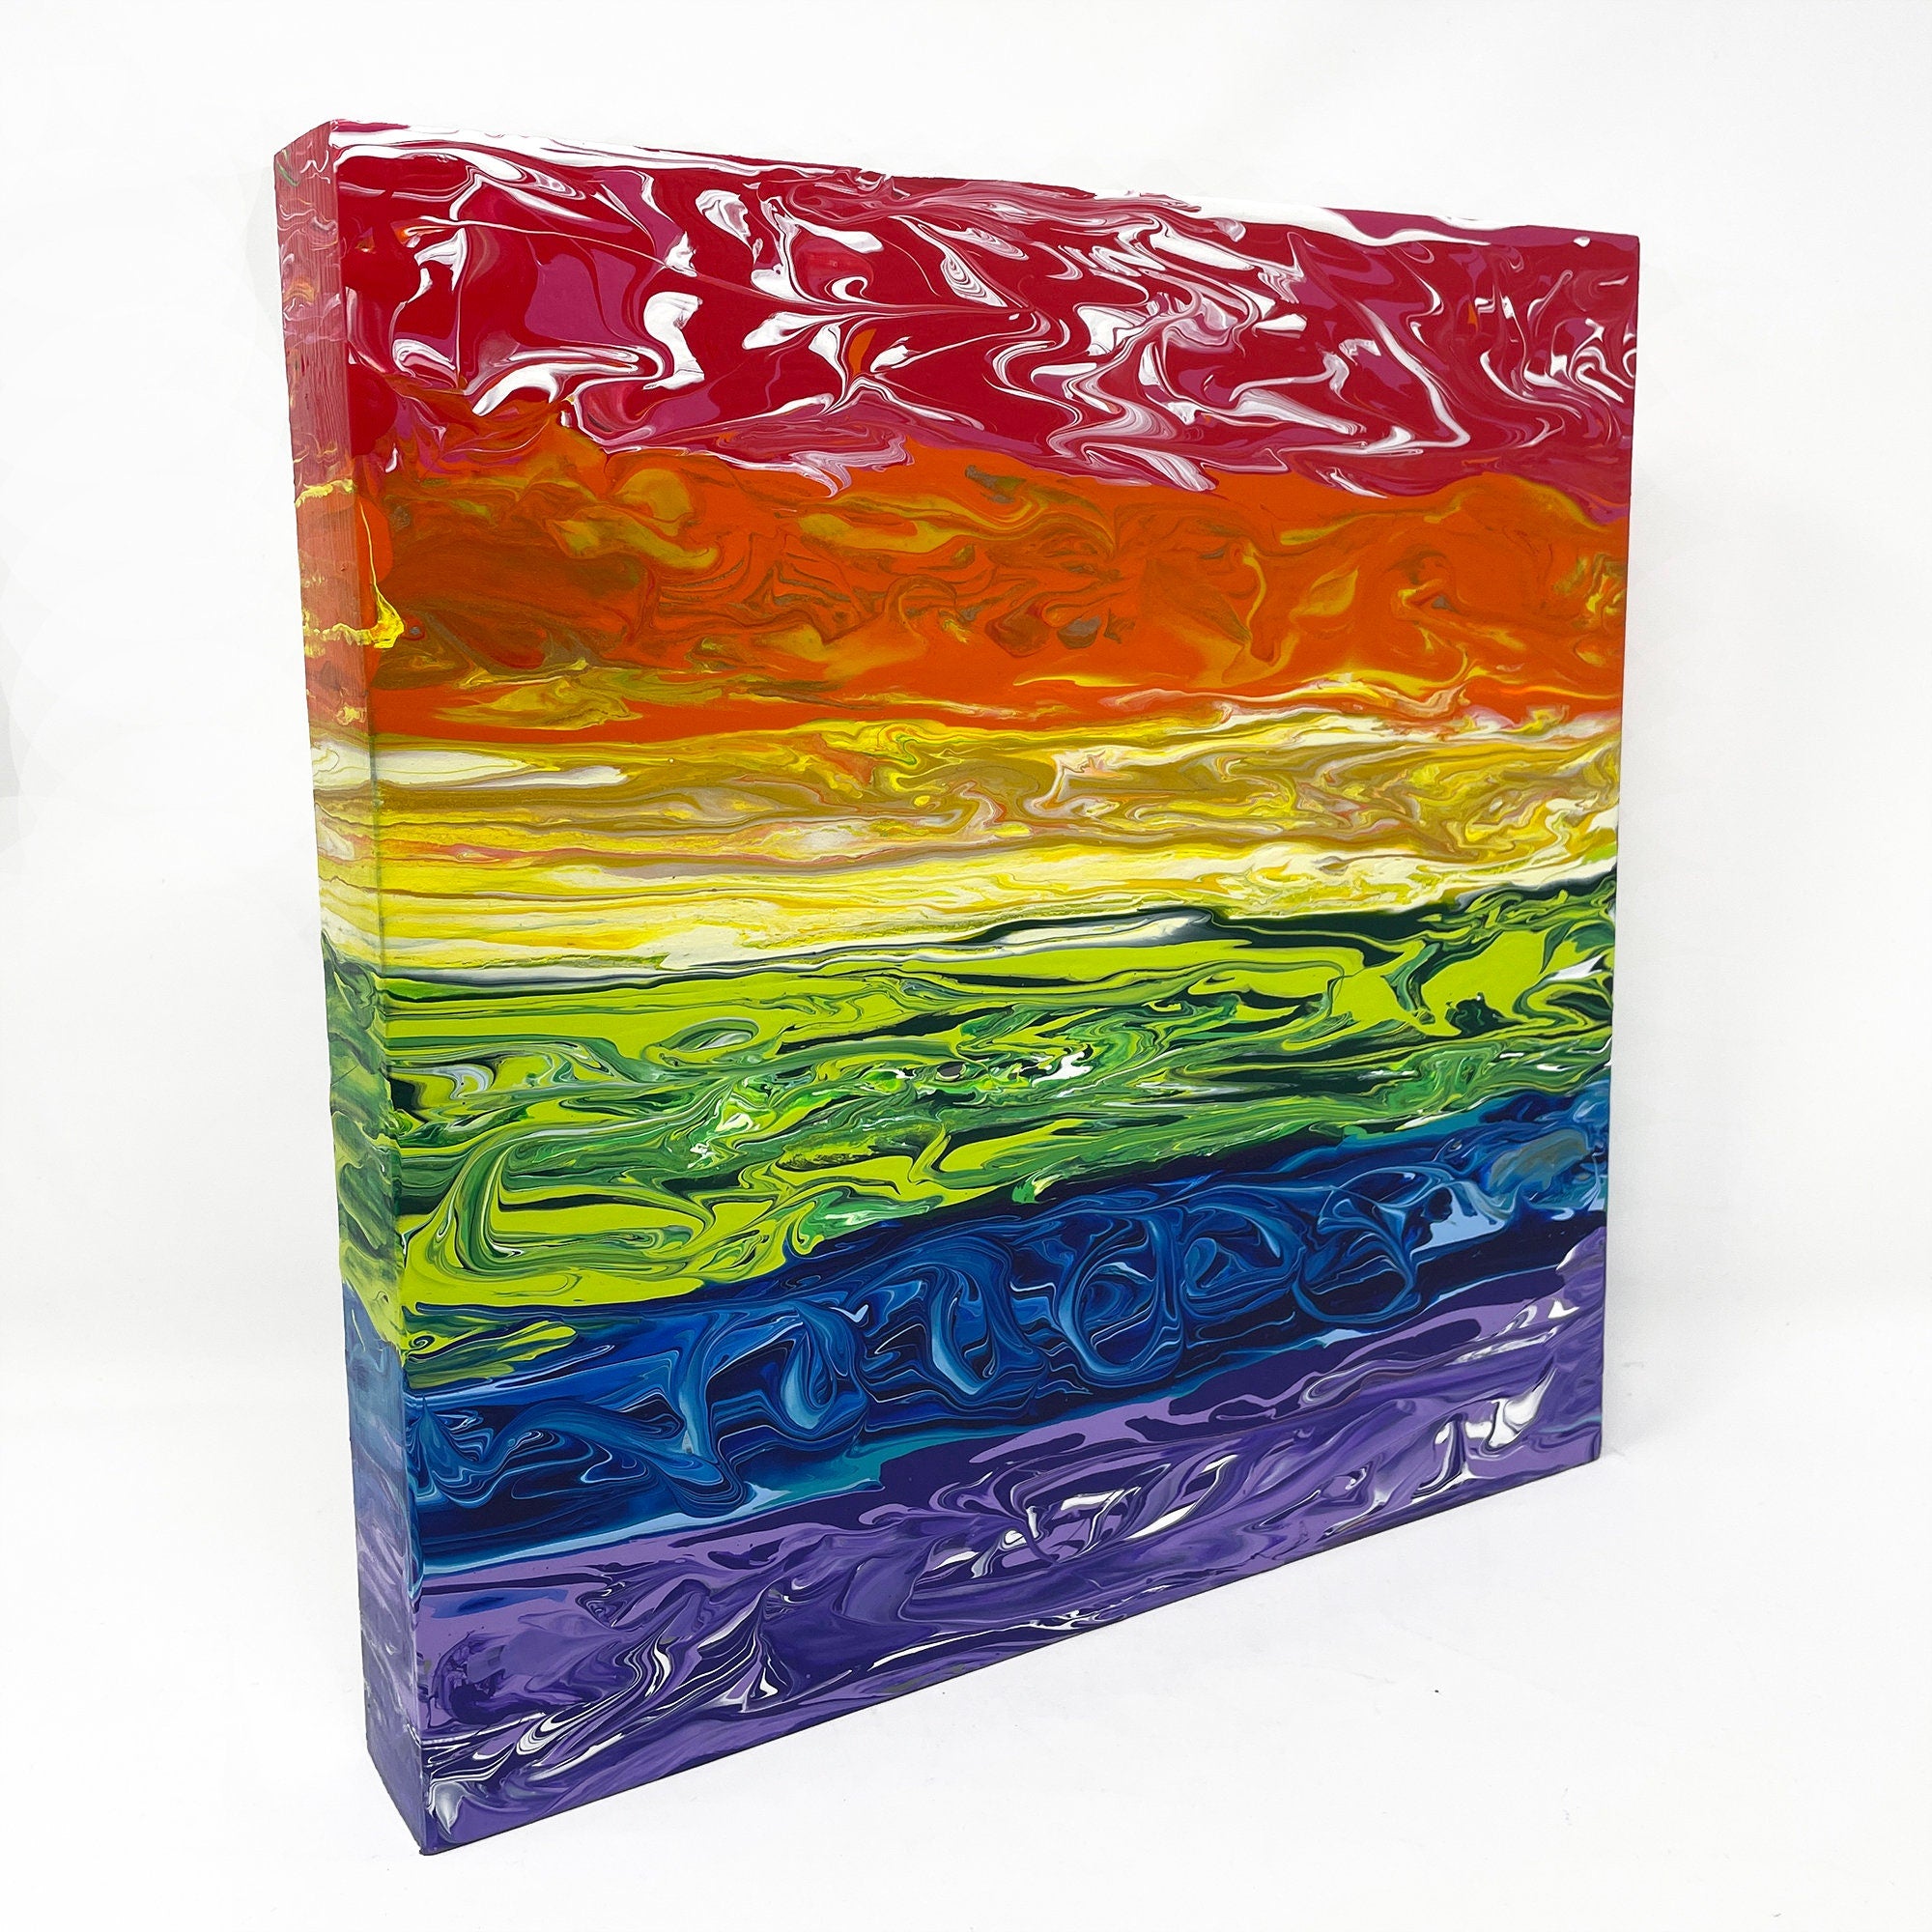 Paint Pour Rainbow Painting - Original Acrylic Painting - Square 12 x 12 inches - Abstract Vibrant Colorful Art